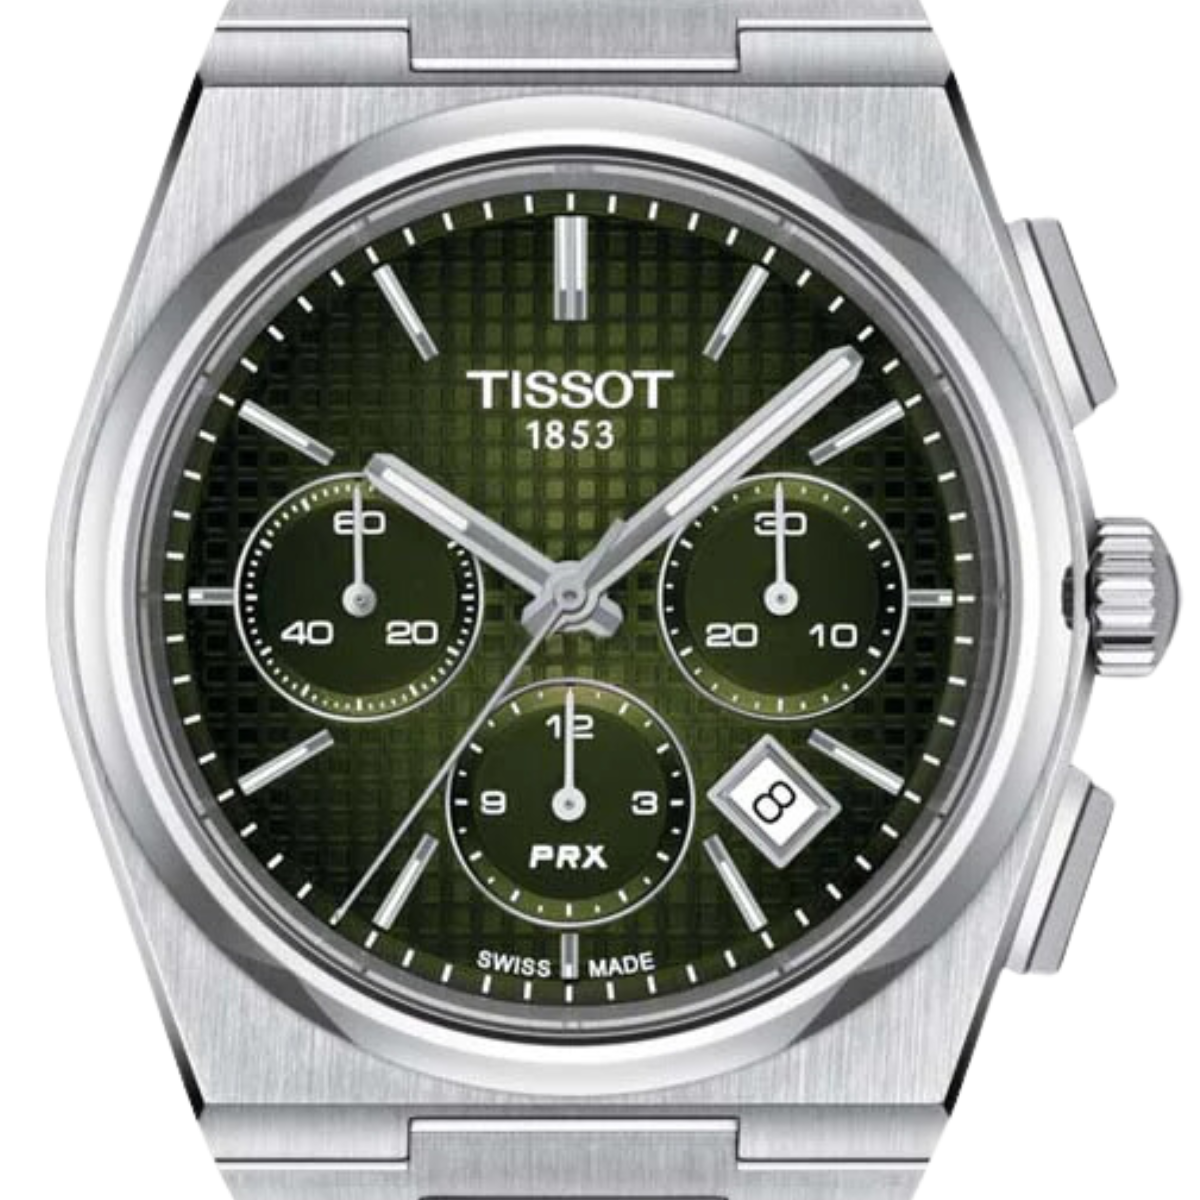 Tissot 1853 PRX Automatic Chronograph T1374271109100 T137.427.11.091.00 Green Dial Watch